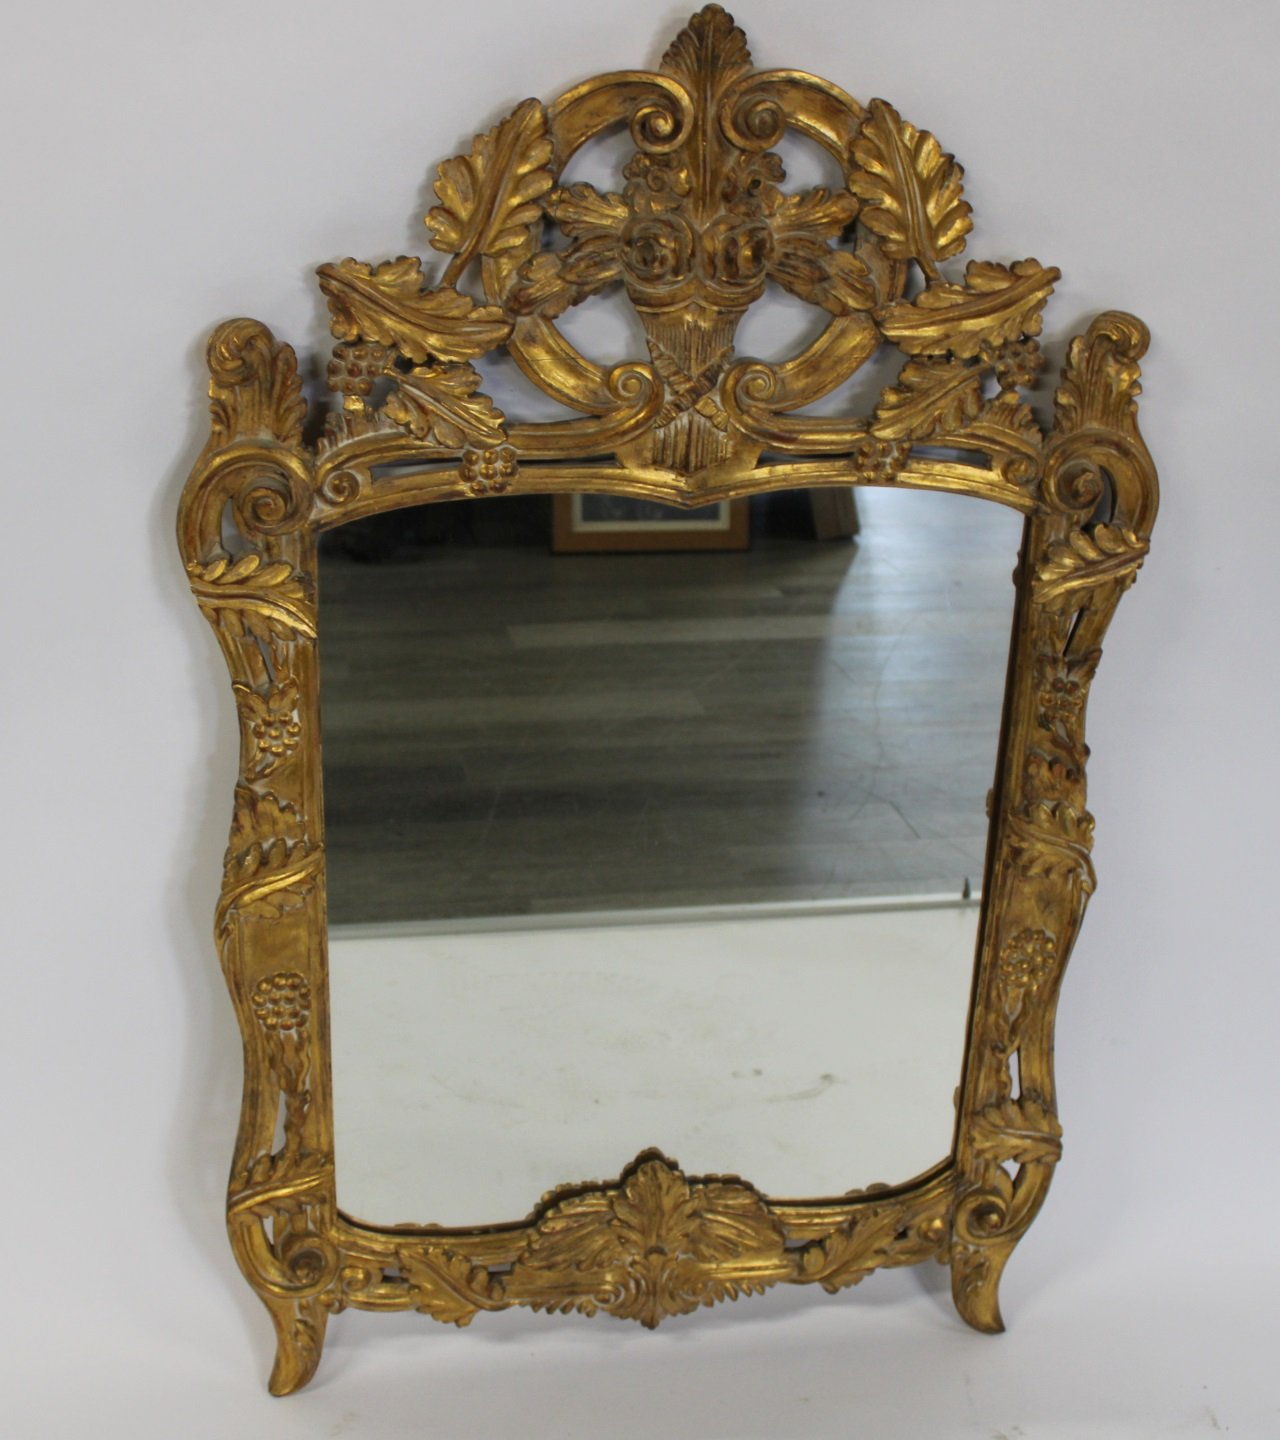 ANTIQUE ITALIAN CARVED GILTWOOD